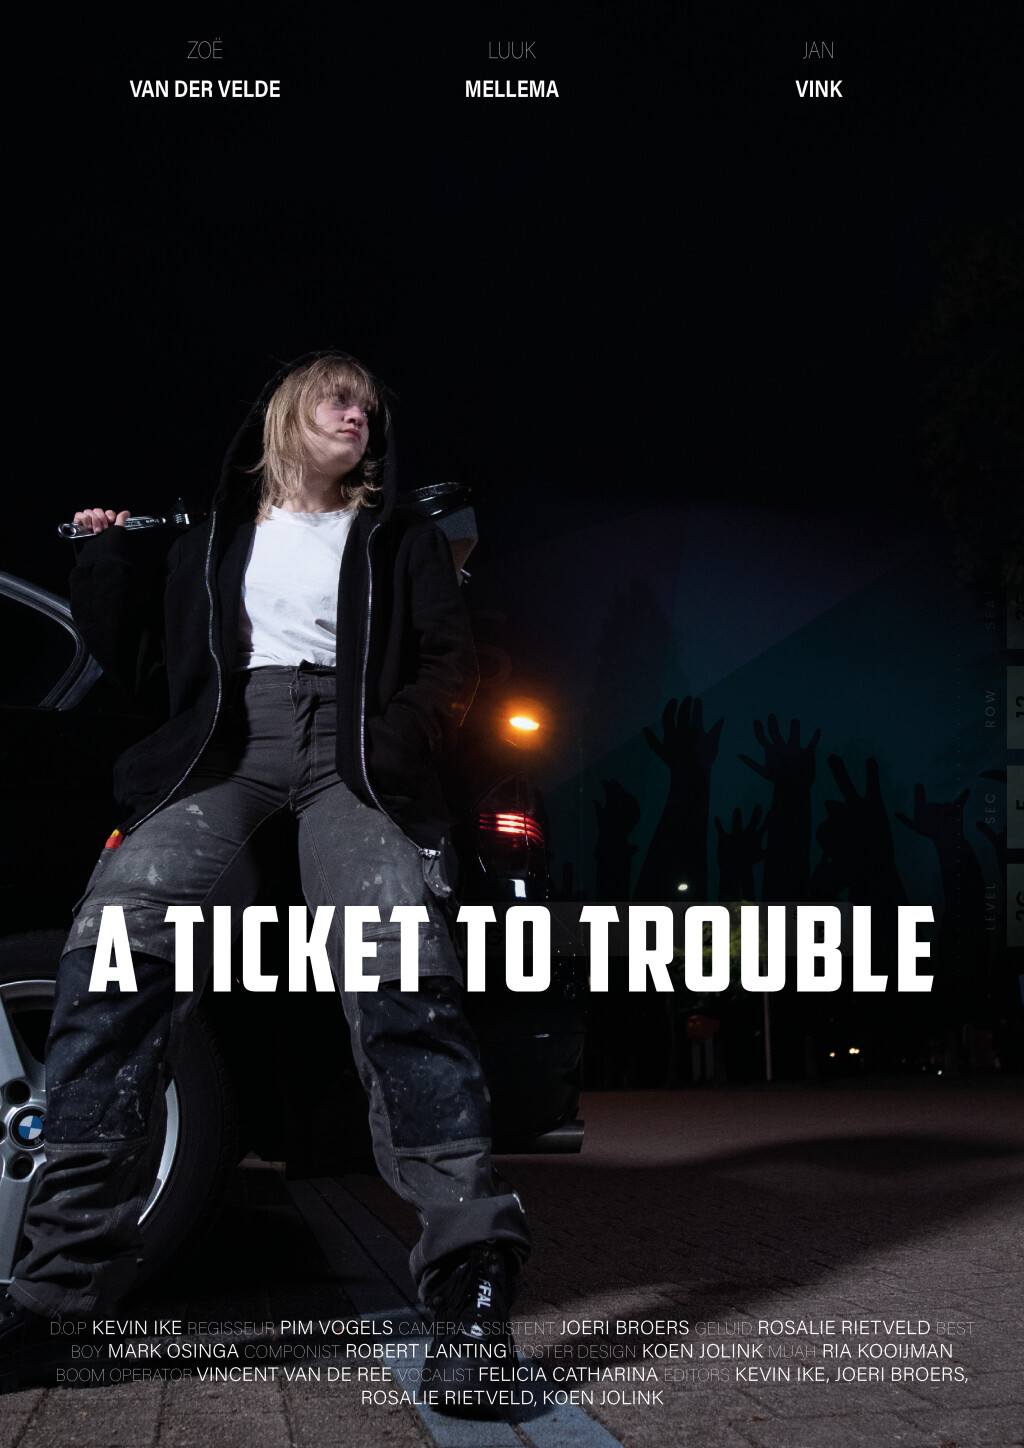 Filmposter for A ticket to trouble